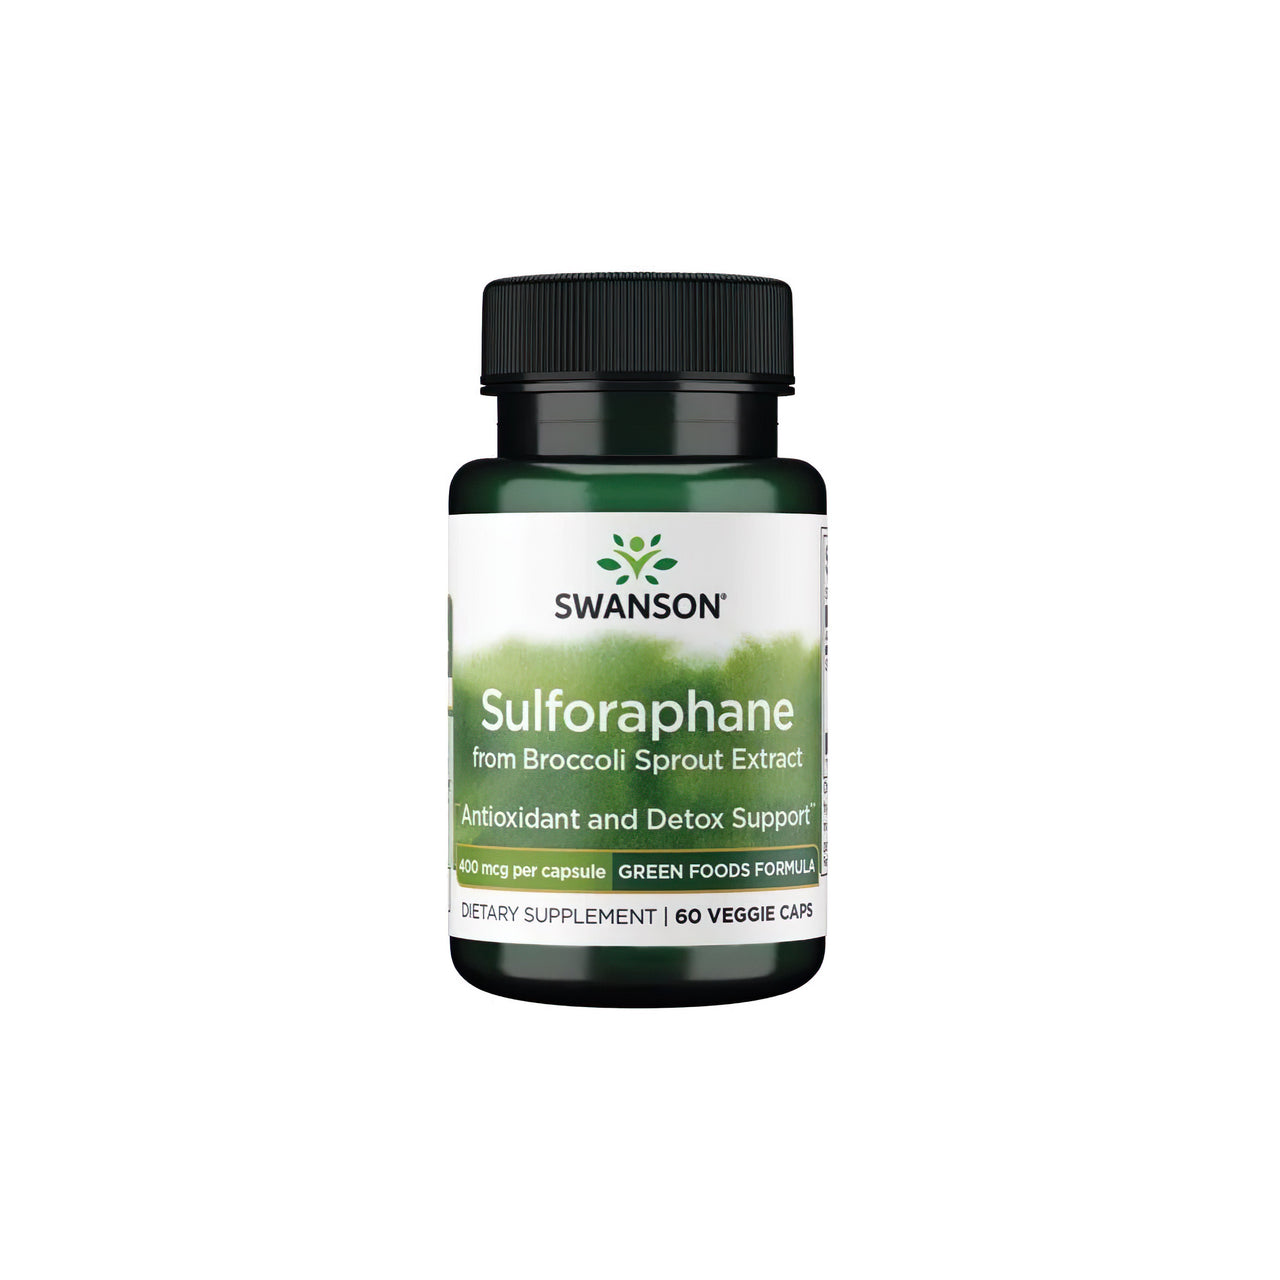 Bottle of Swanson Sulforaphane from Broccoli Sprout Extract 400 mcg 60 Veggie Capsules.